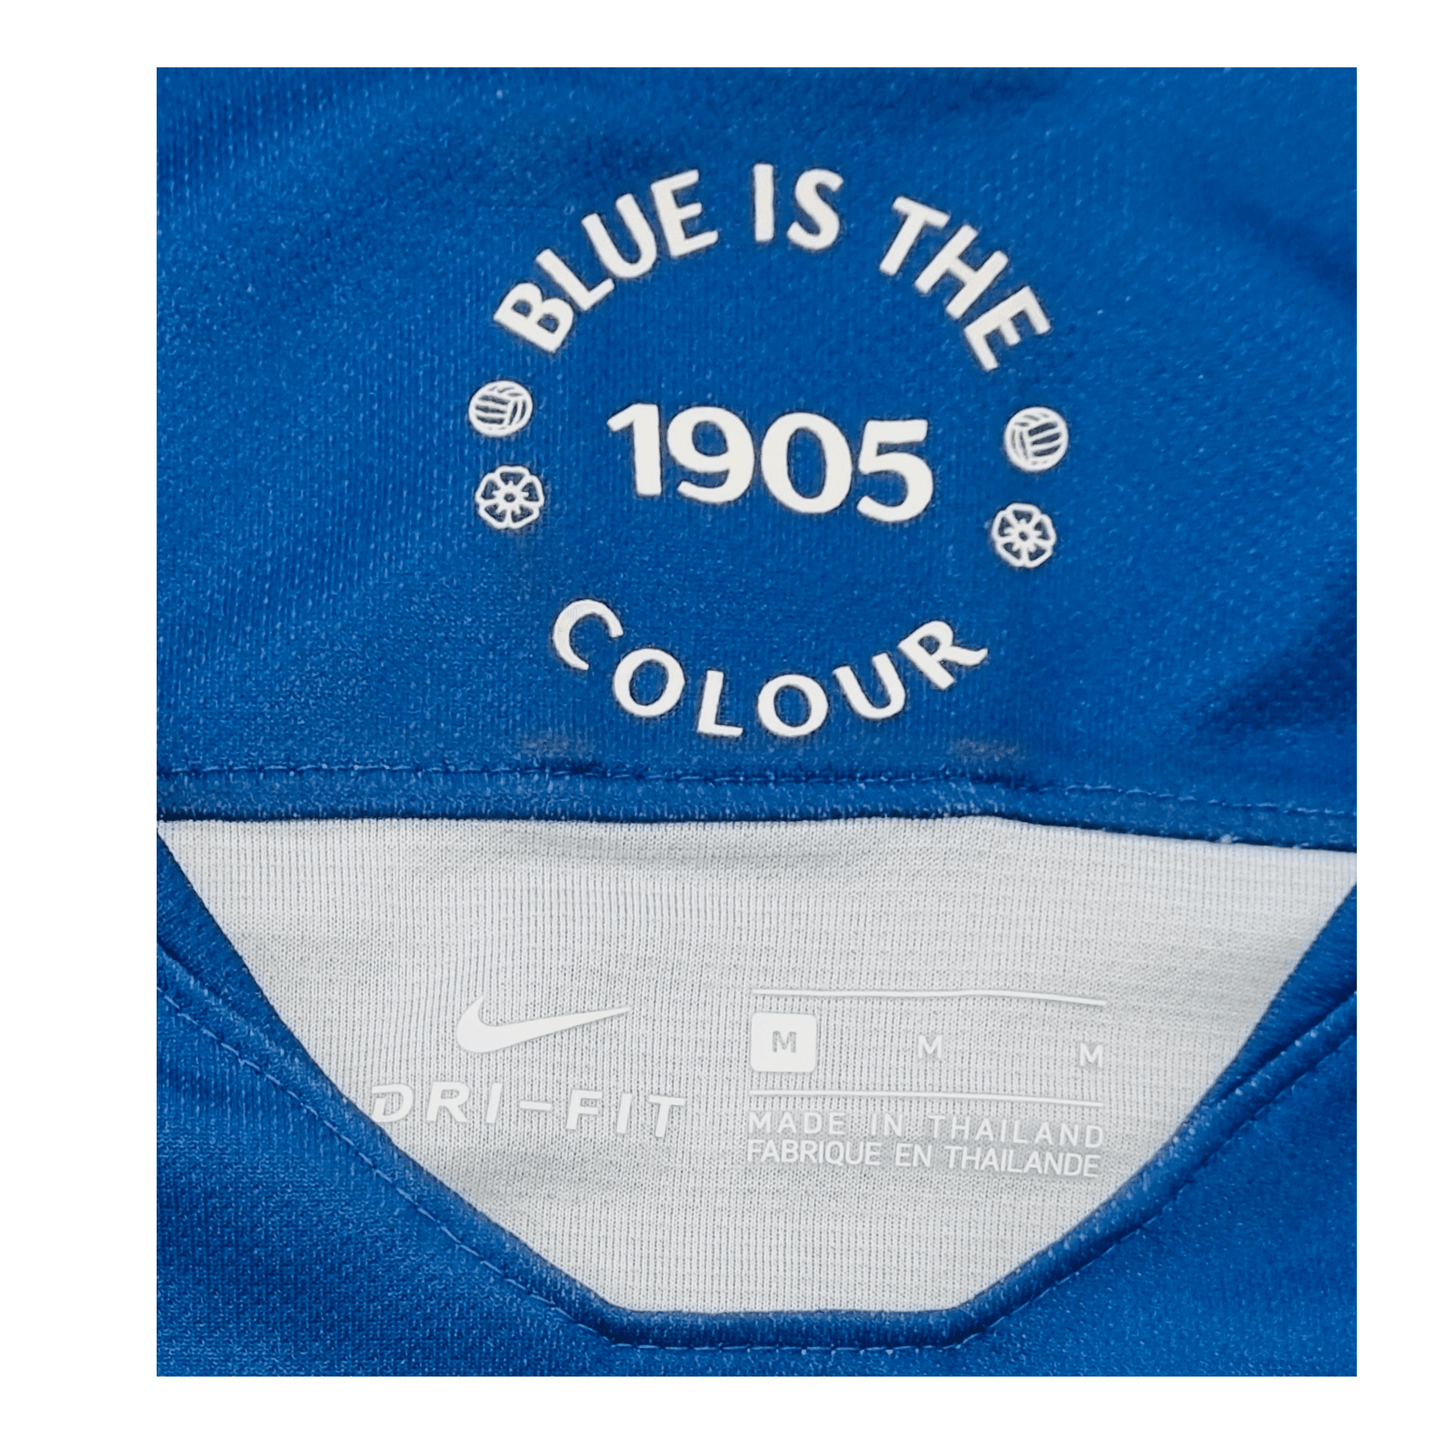 A Nike Chelsea 2018/19 Home Jersey, featuring the 1995 colour, perfect as a Chelsea Home Jersey.